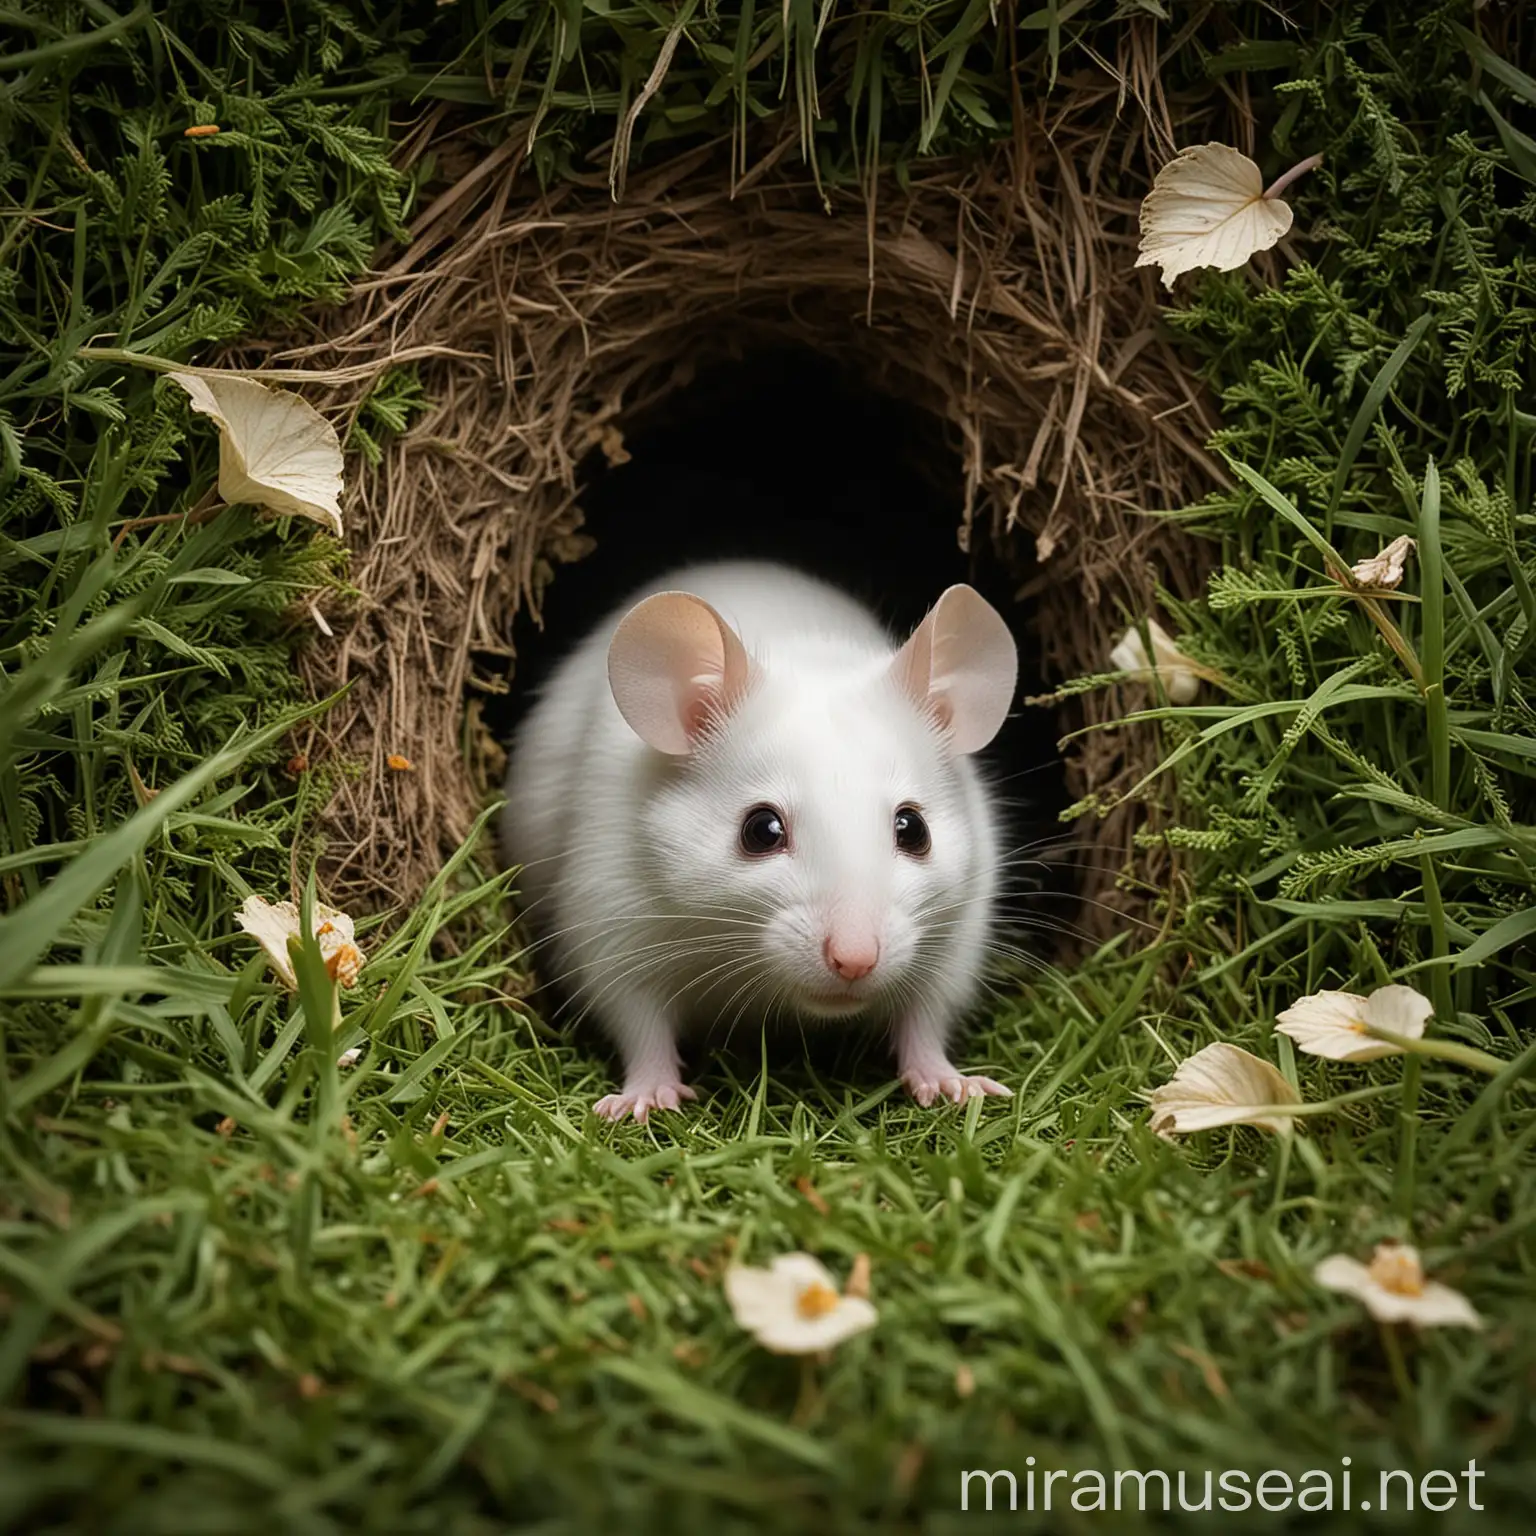 Curious White Mouse Emerging from Hole in Lush Green Grass Field